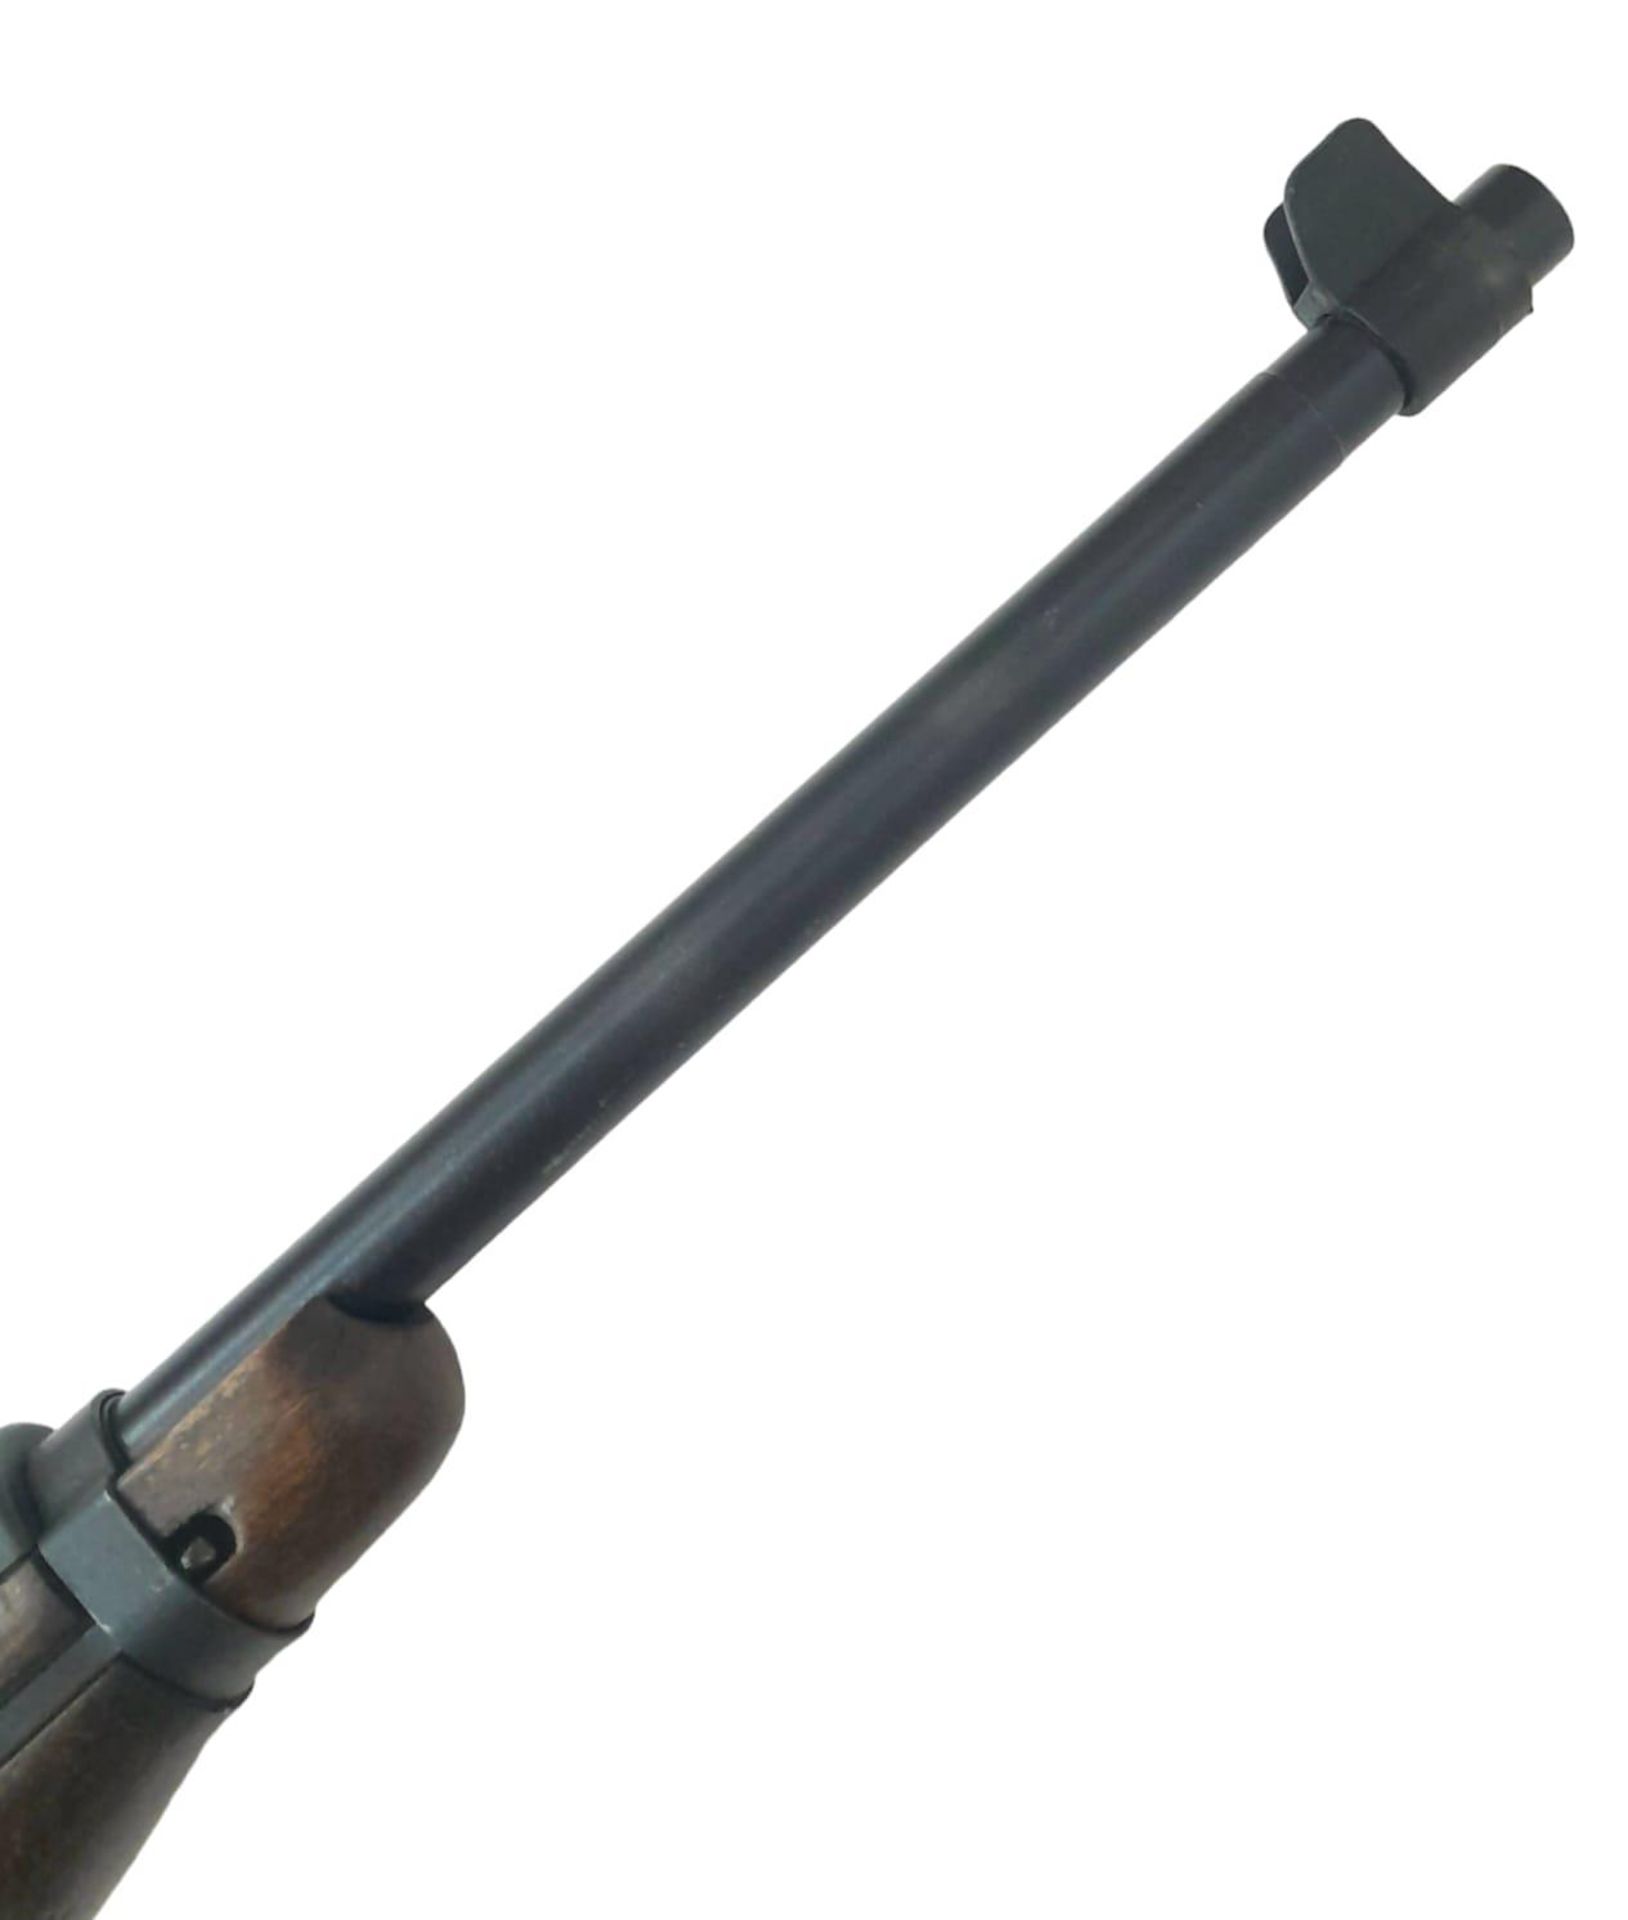 A Deactivated Winchester M1 Carbine Self Loading Rifle. Used by the USA in warfare from 1942-73 this - Image 8 of 12